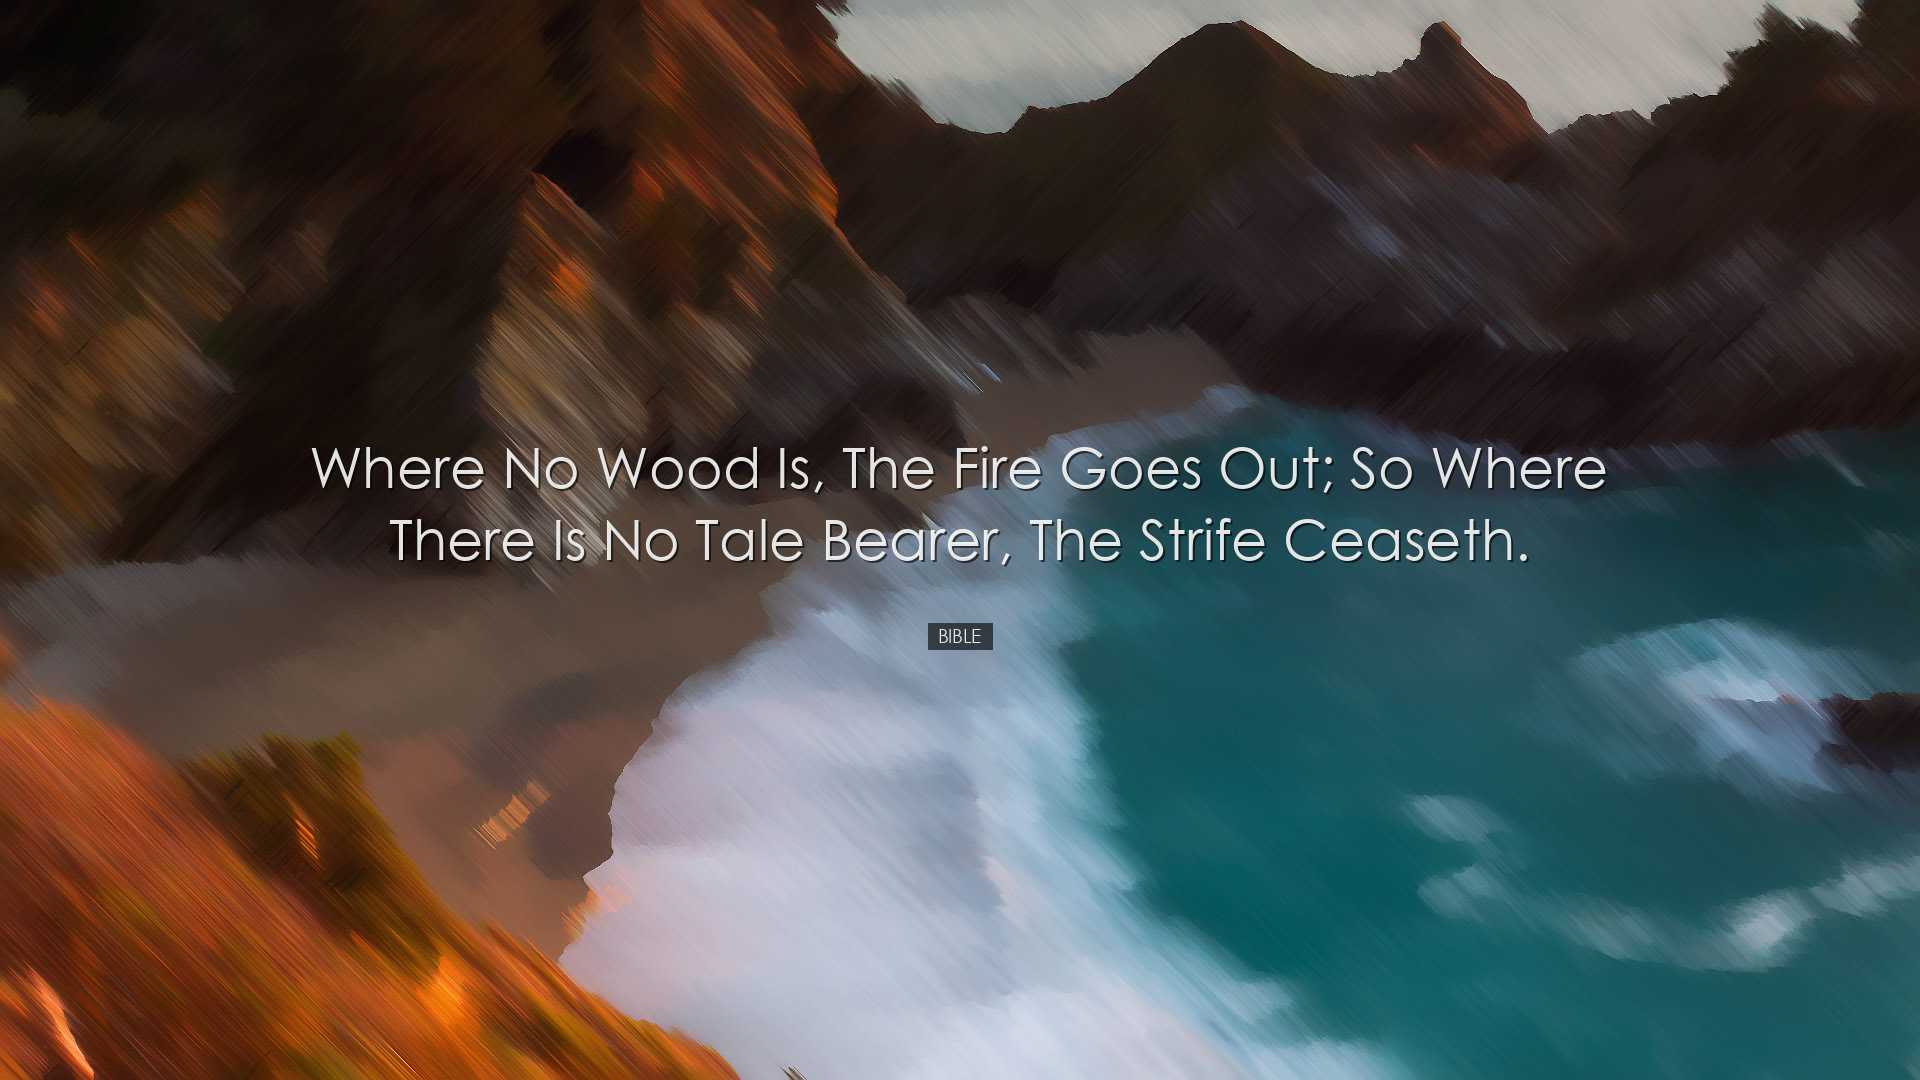 Where no wood is, the fire goes out; so where there is no tale bea